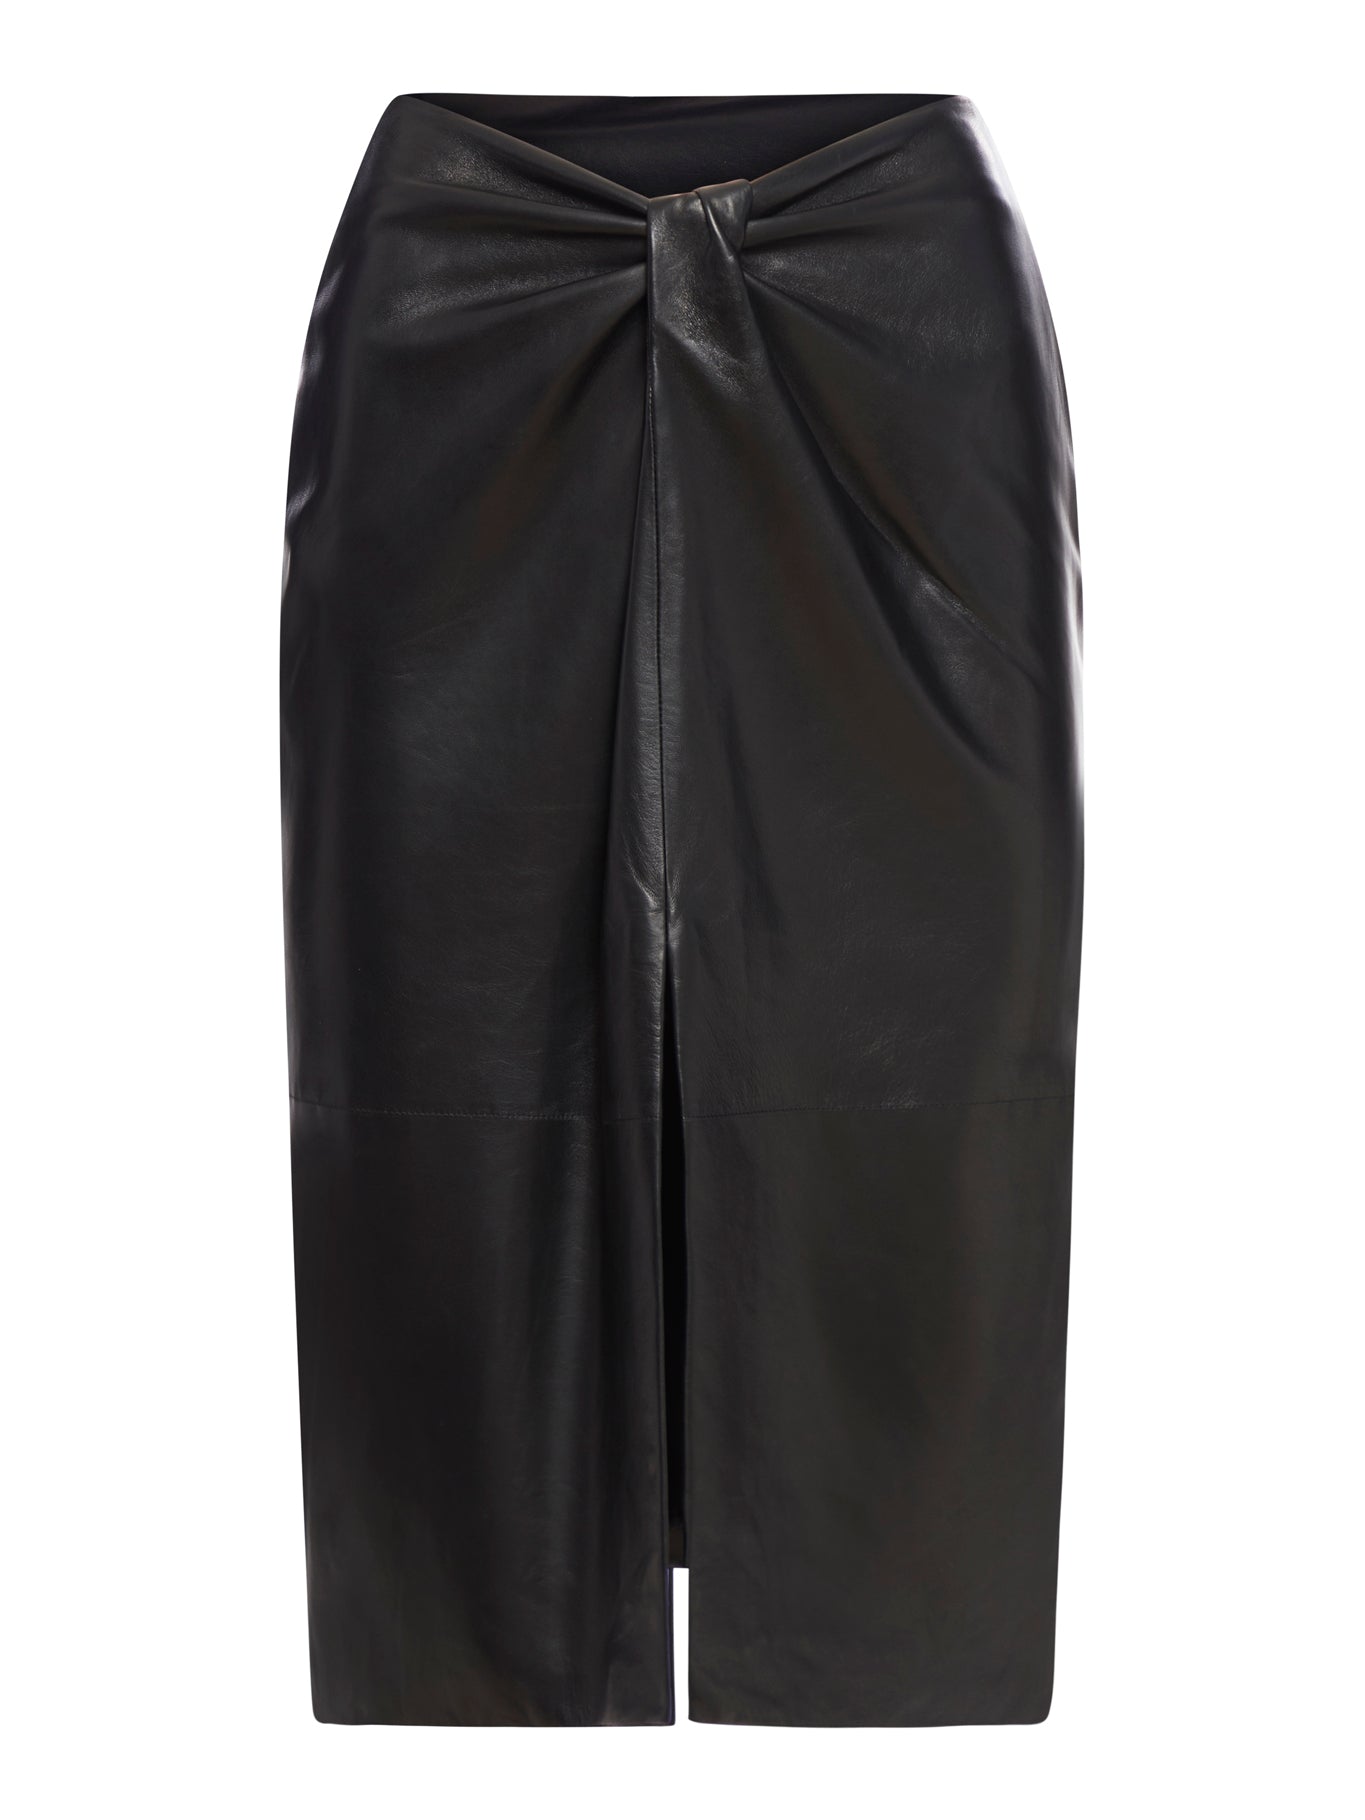 Knotted Leather Midi Skirt